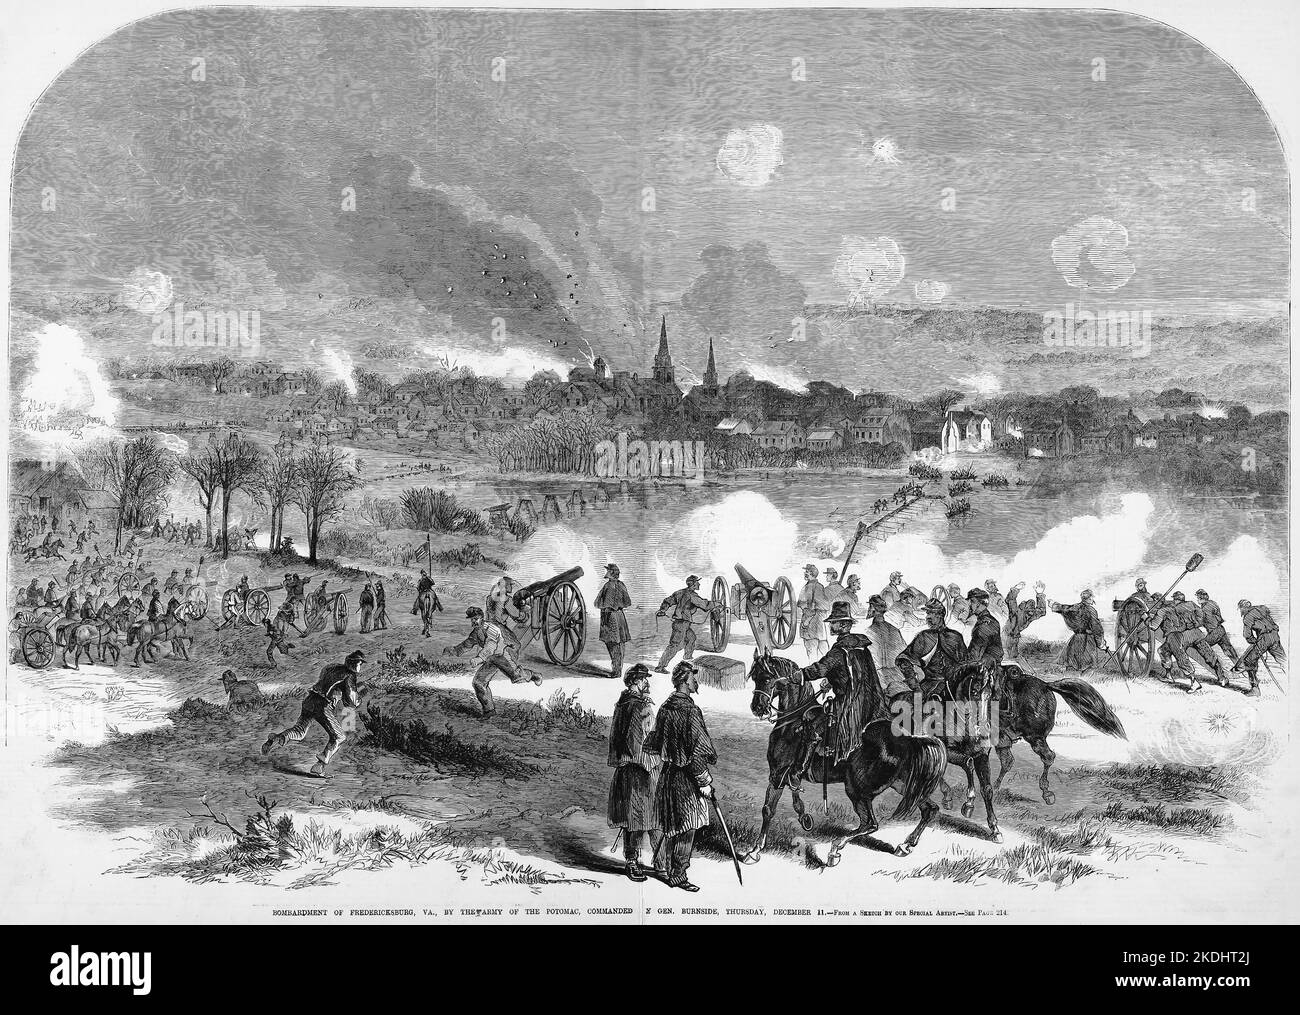 Bombardment of Fredericksburg, Virginia, by the Army of the Potomac, commanded by General Ambrose Everett Burnside, Thursday, December 11th, 1862. Battle of Fredericksburg. 19th century American Civil War illustration from Frank Leslie's Illustrated Newspaper Stock Photo